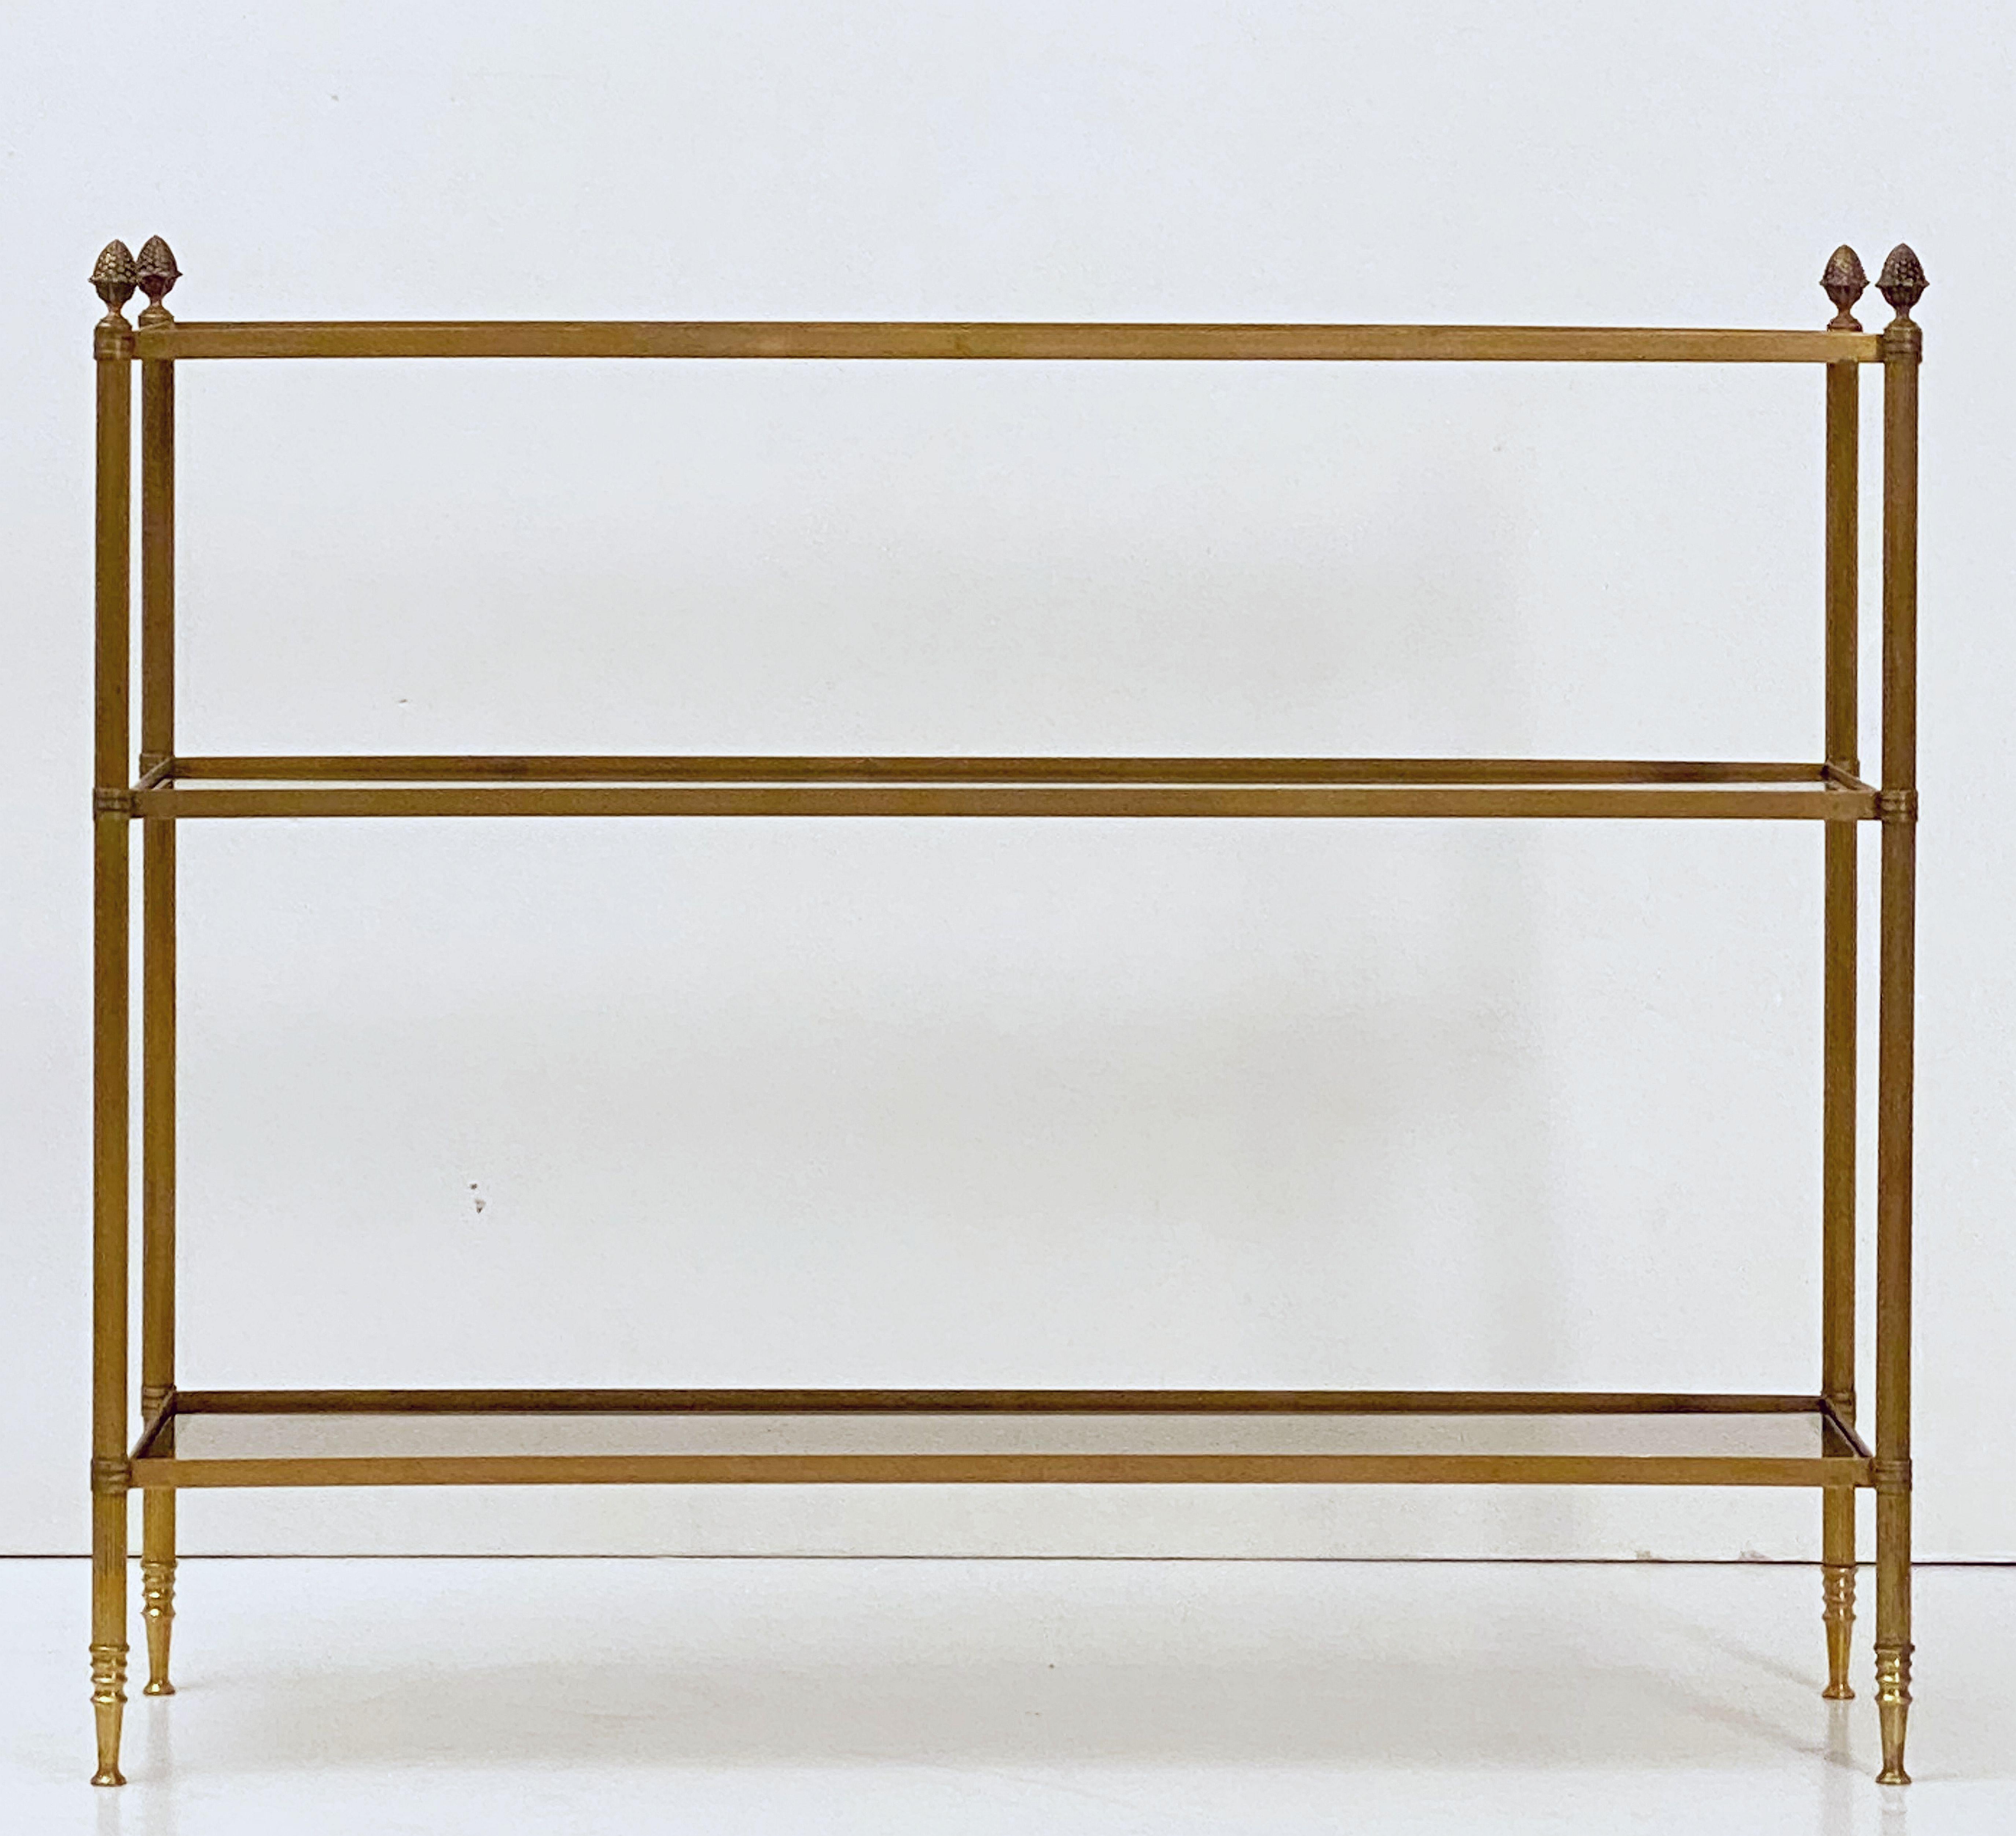 A fine French open étagère or display shelf - featuring a stylish modern brass frame with decorative finials and three rectangular shelves of smoked glass. 

Measures: Total unit height: 31.5 inches
Top tier or shelf height: 29.5 inches.